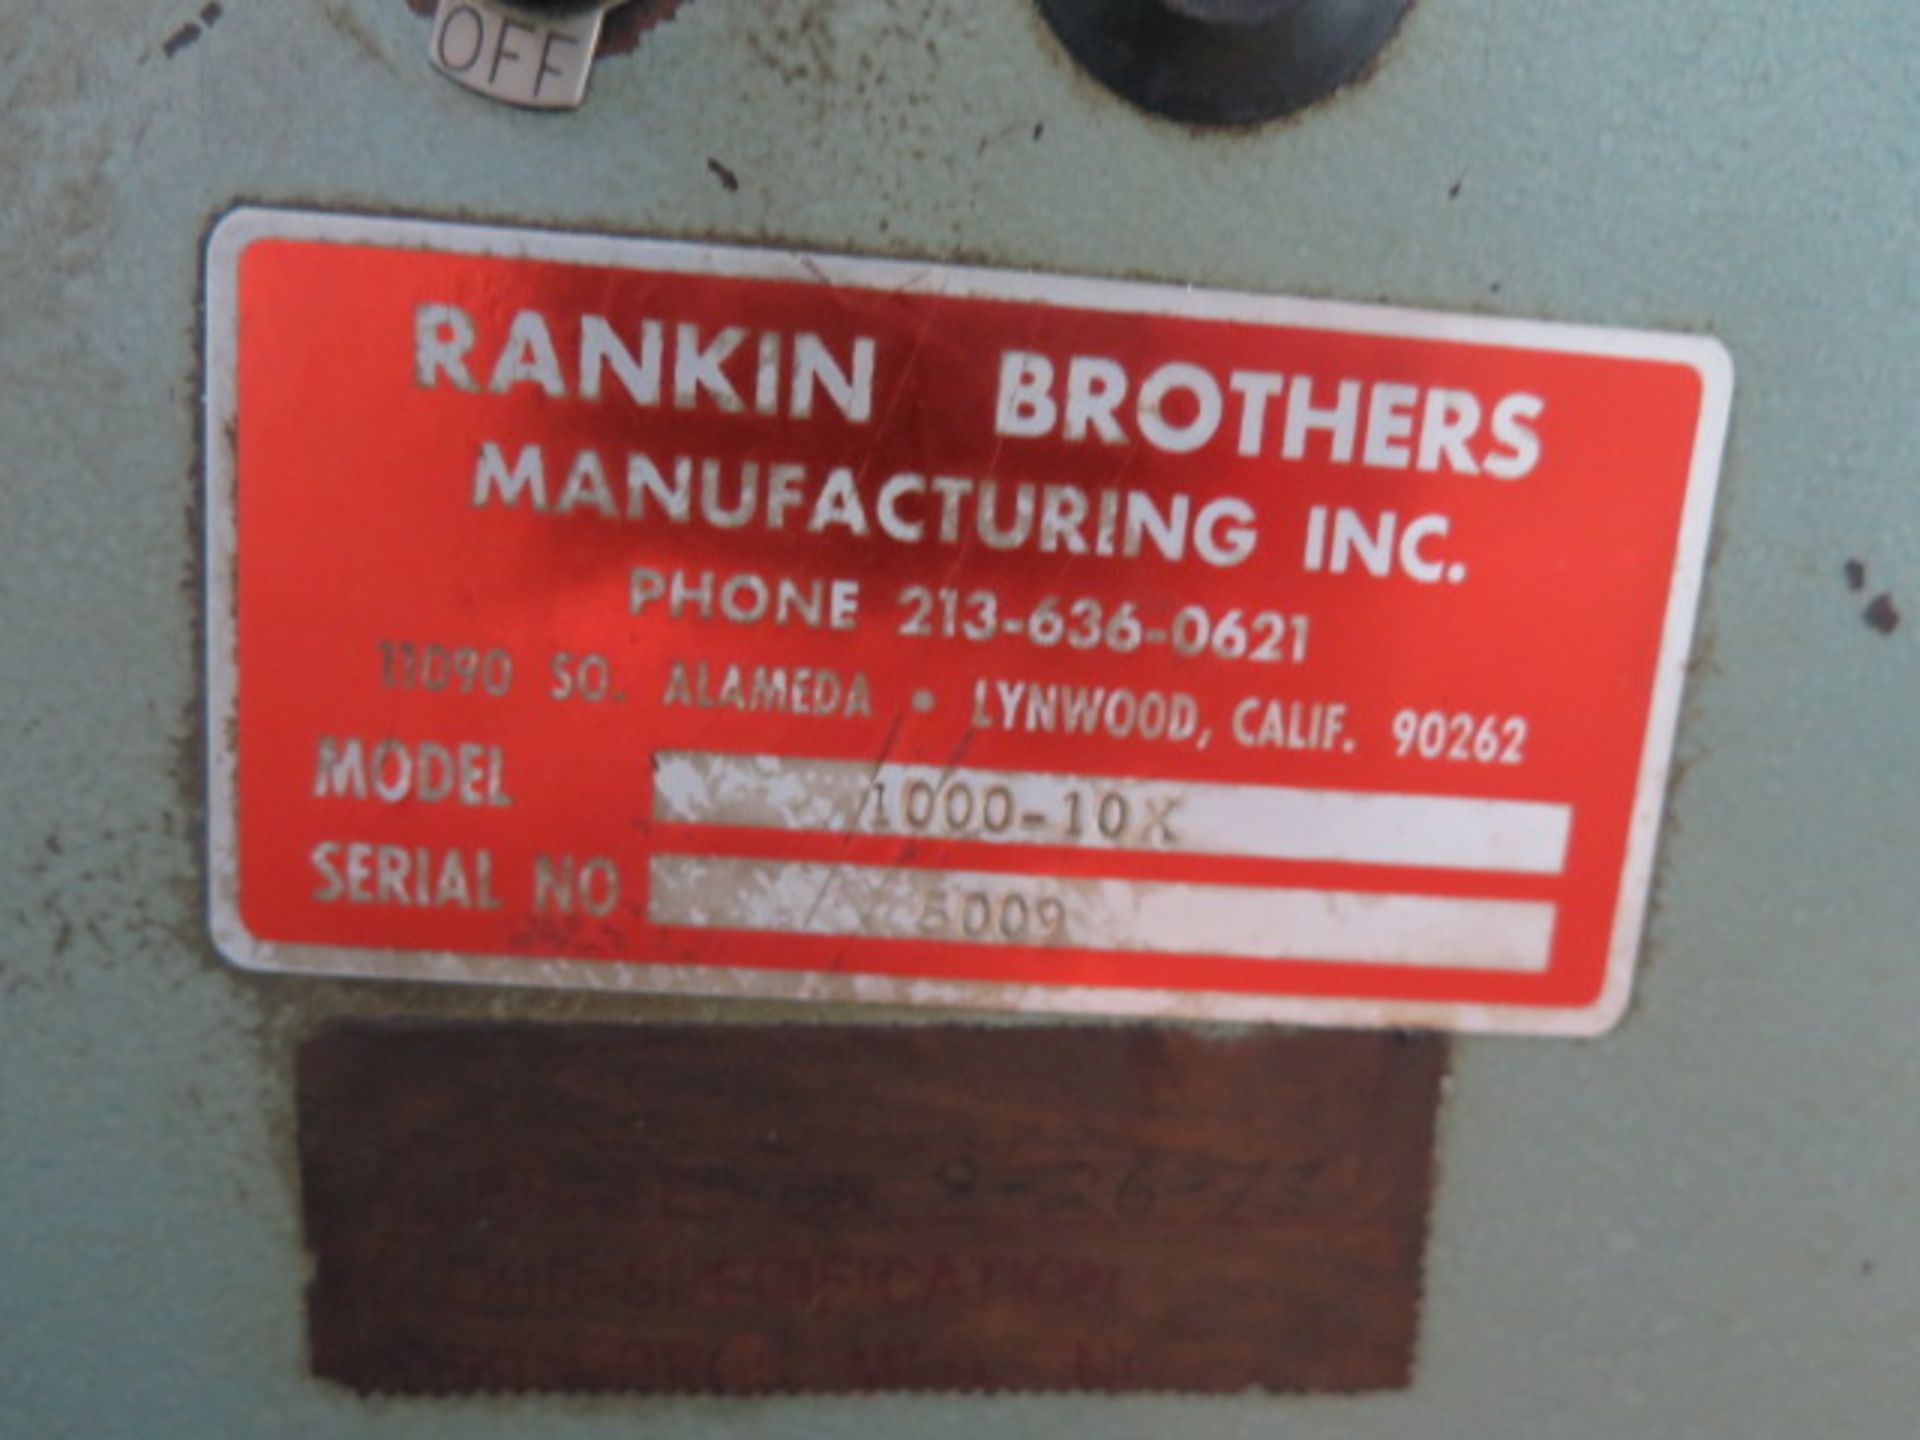 Rankin Brothers 10" Bench Model Optical Comparator w/ Digital Indicator Readouts - Image 5 of 5